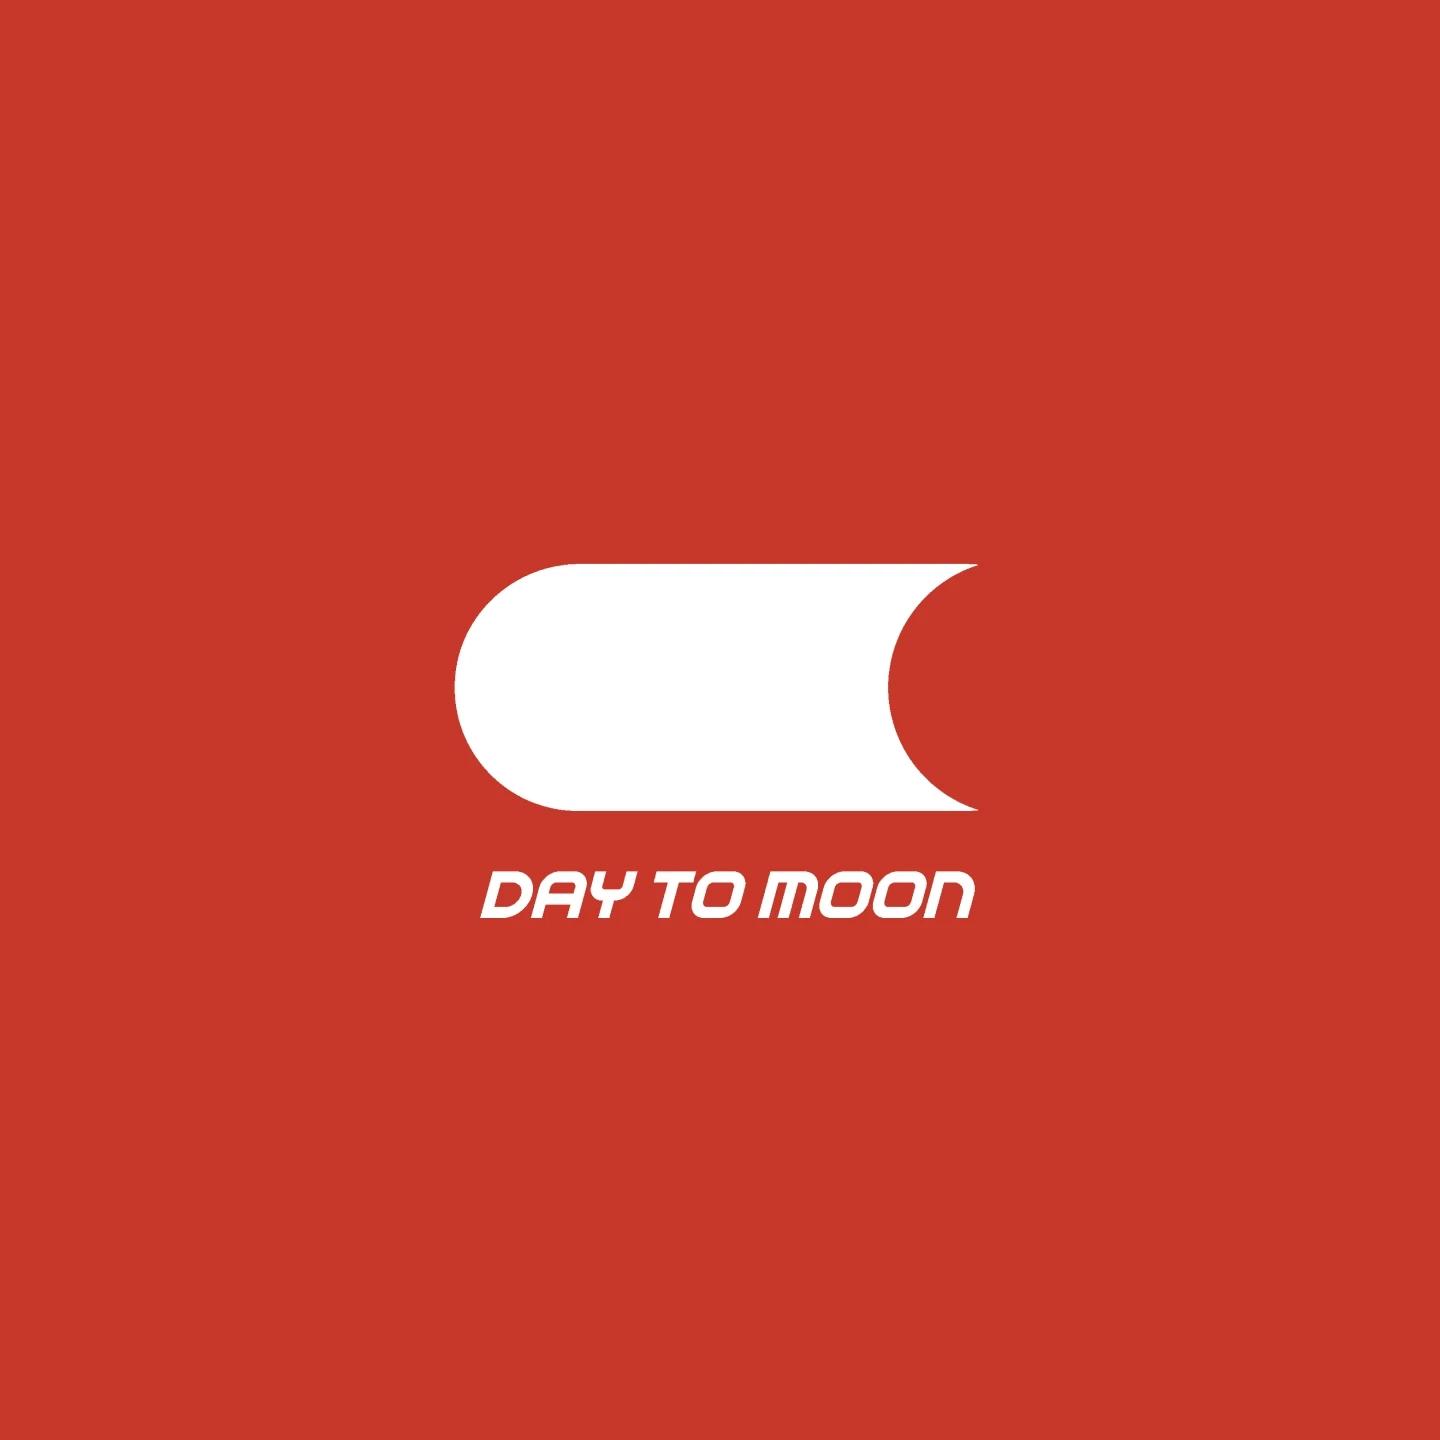 DAY TO MOON